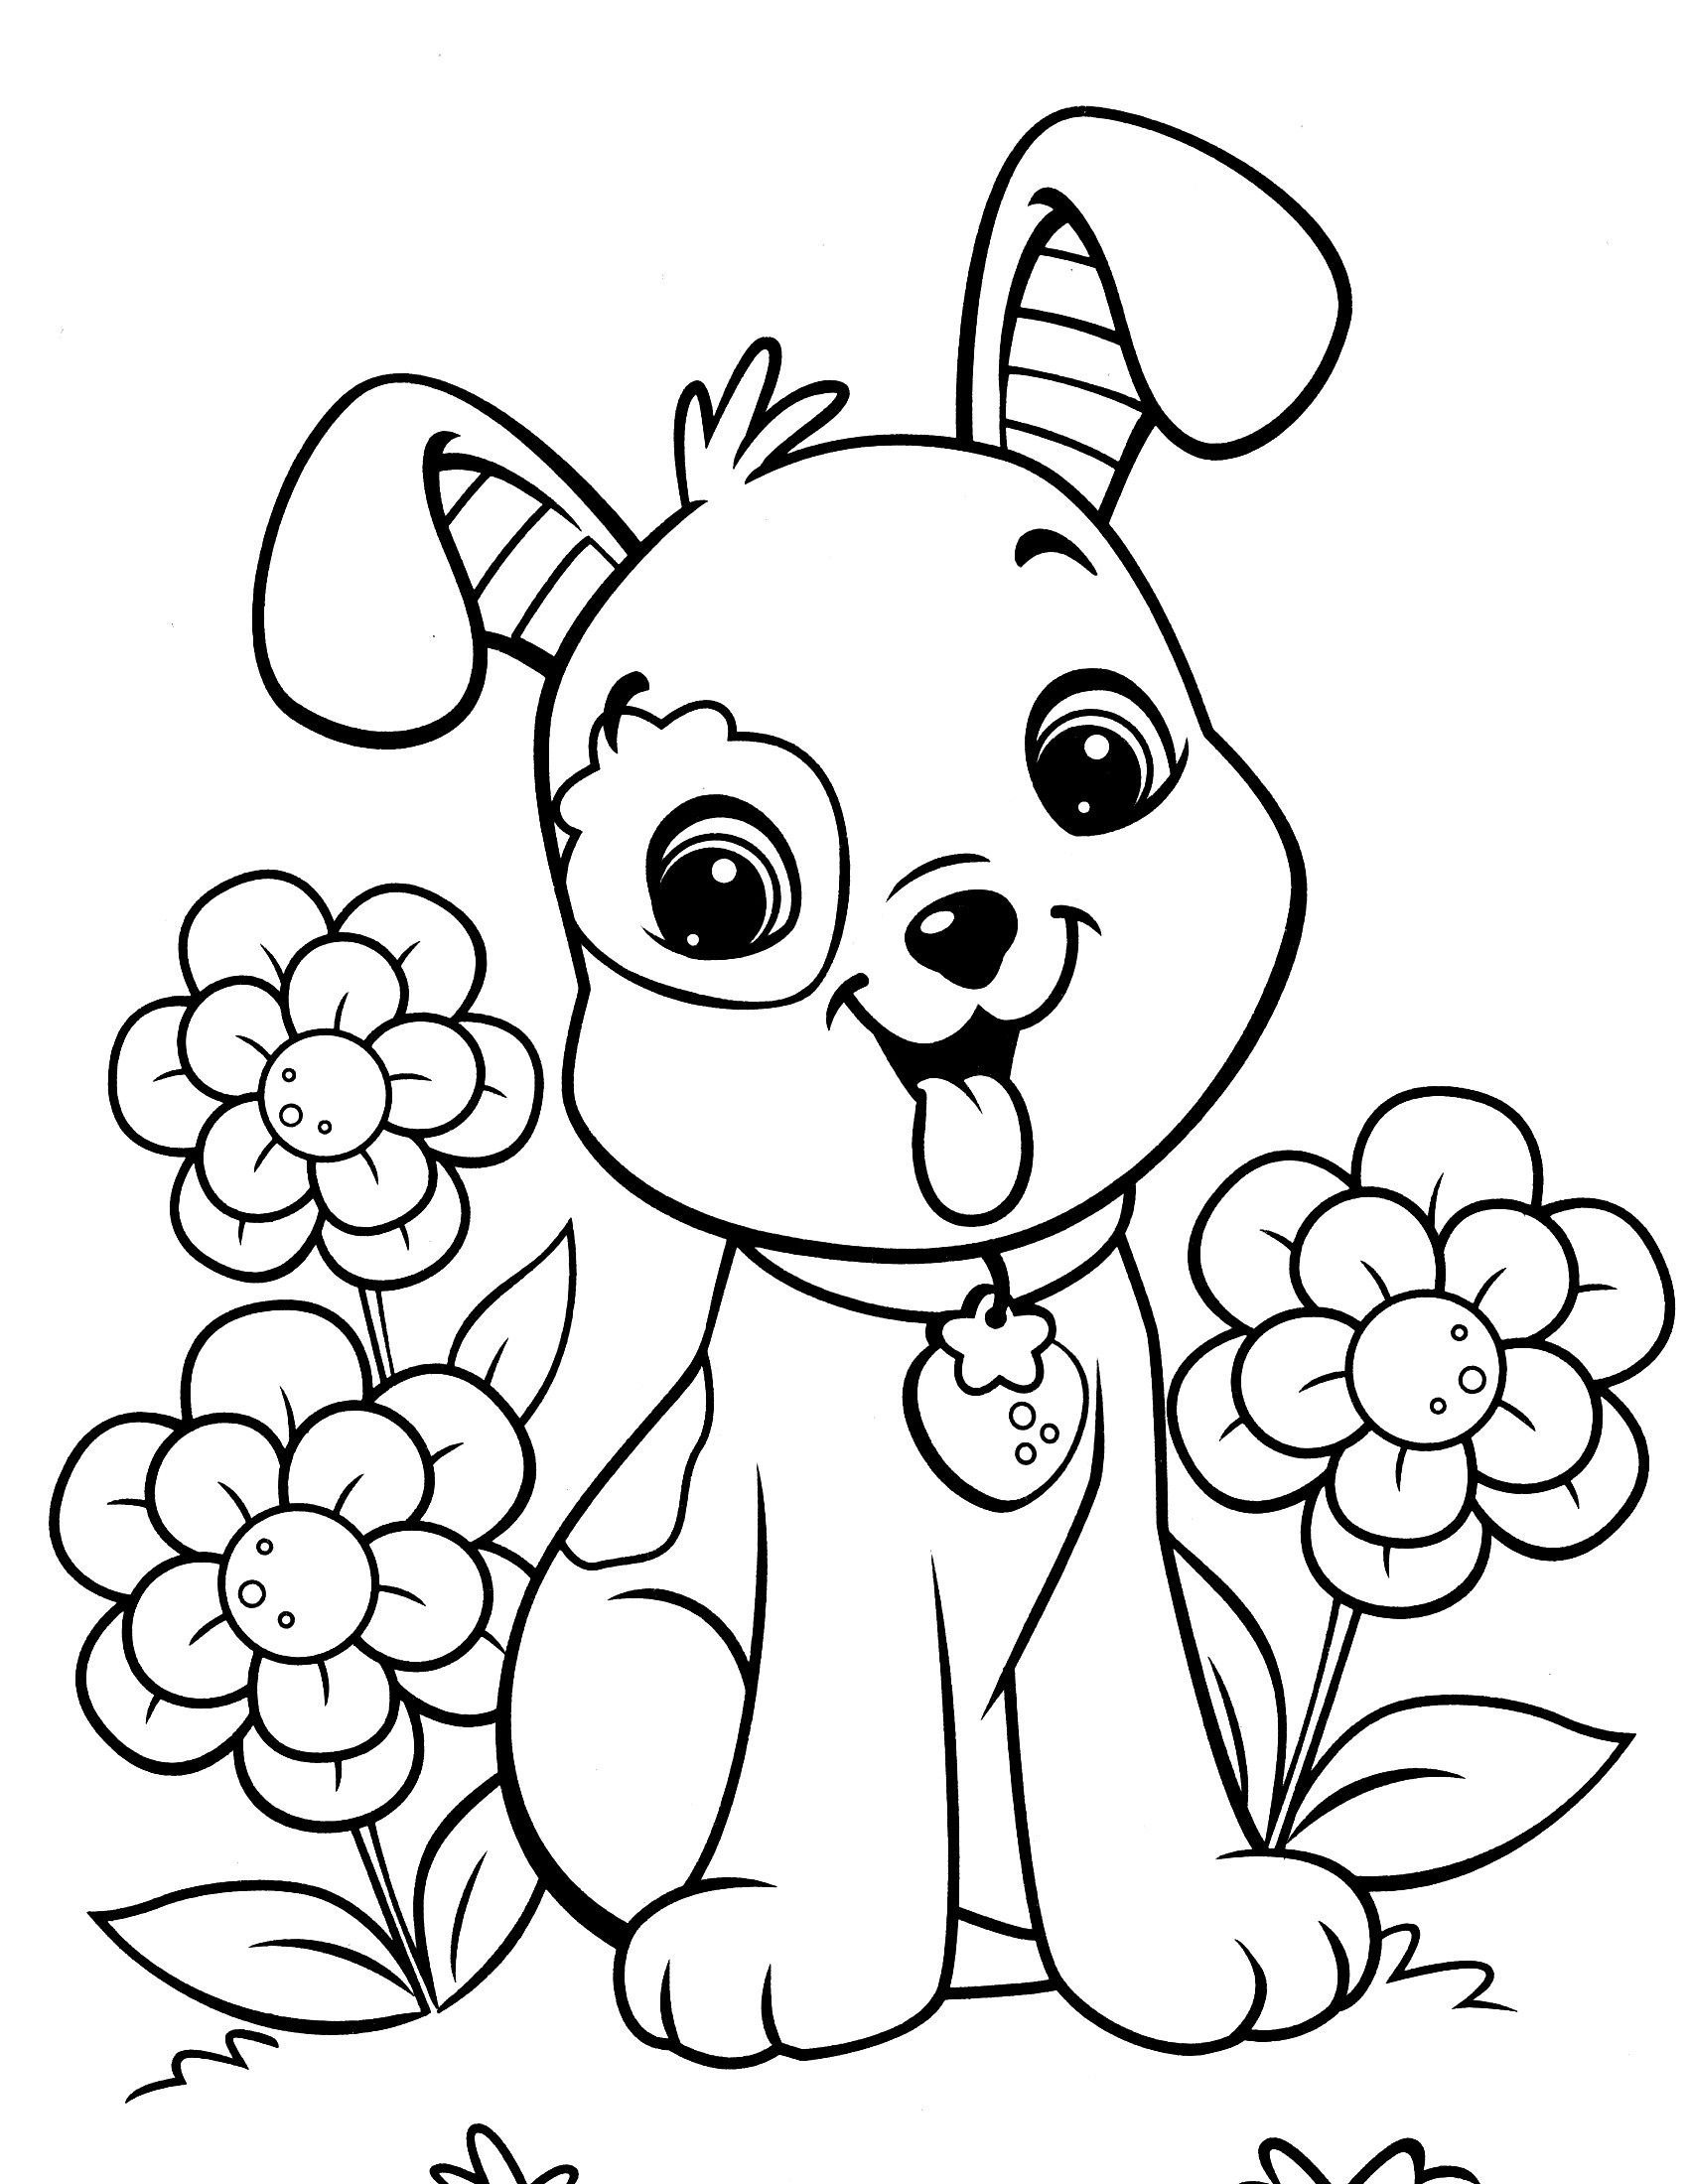 Image Result For Free Dog Coloring Pages | Colouring Pages | Dog - Colouring Pages Dogs Free Printable